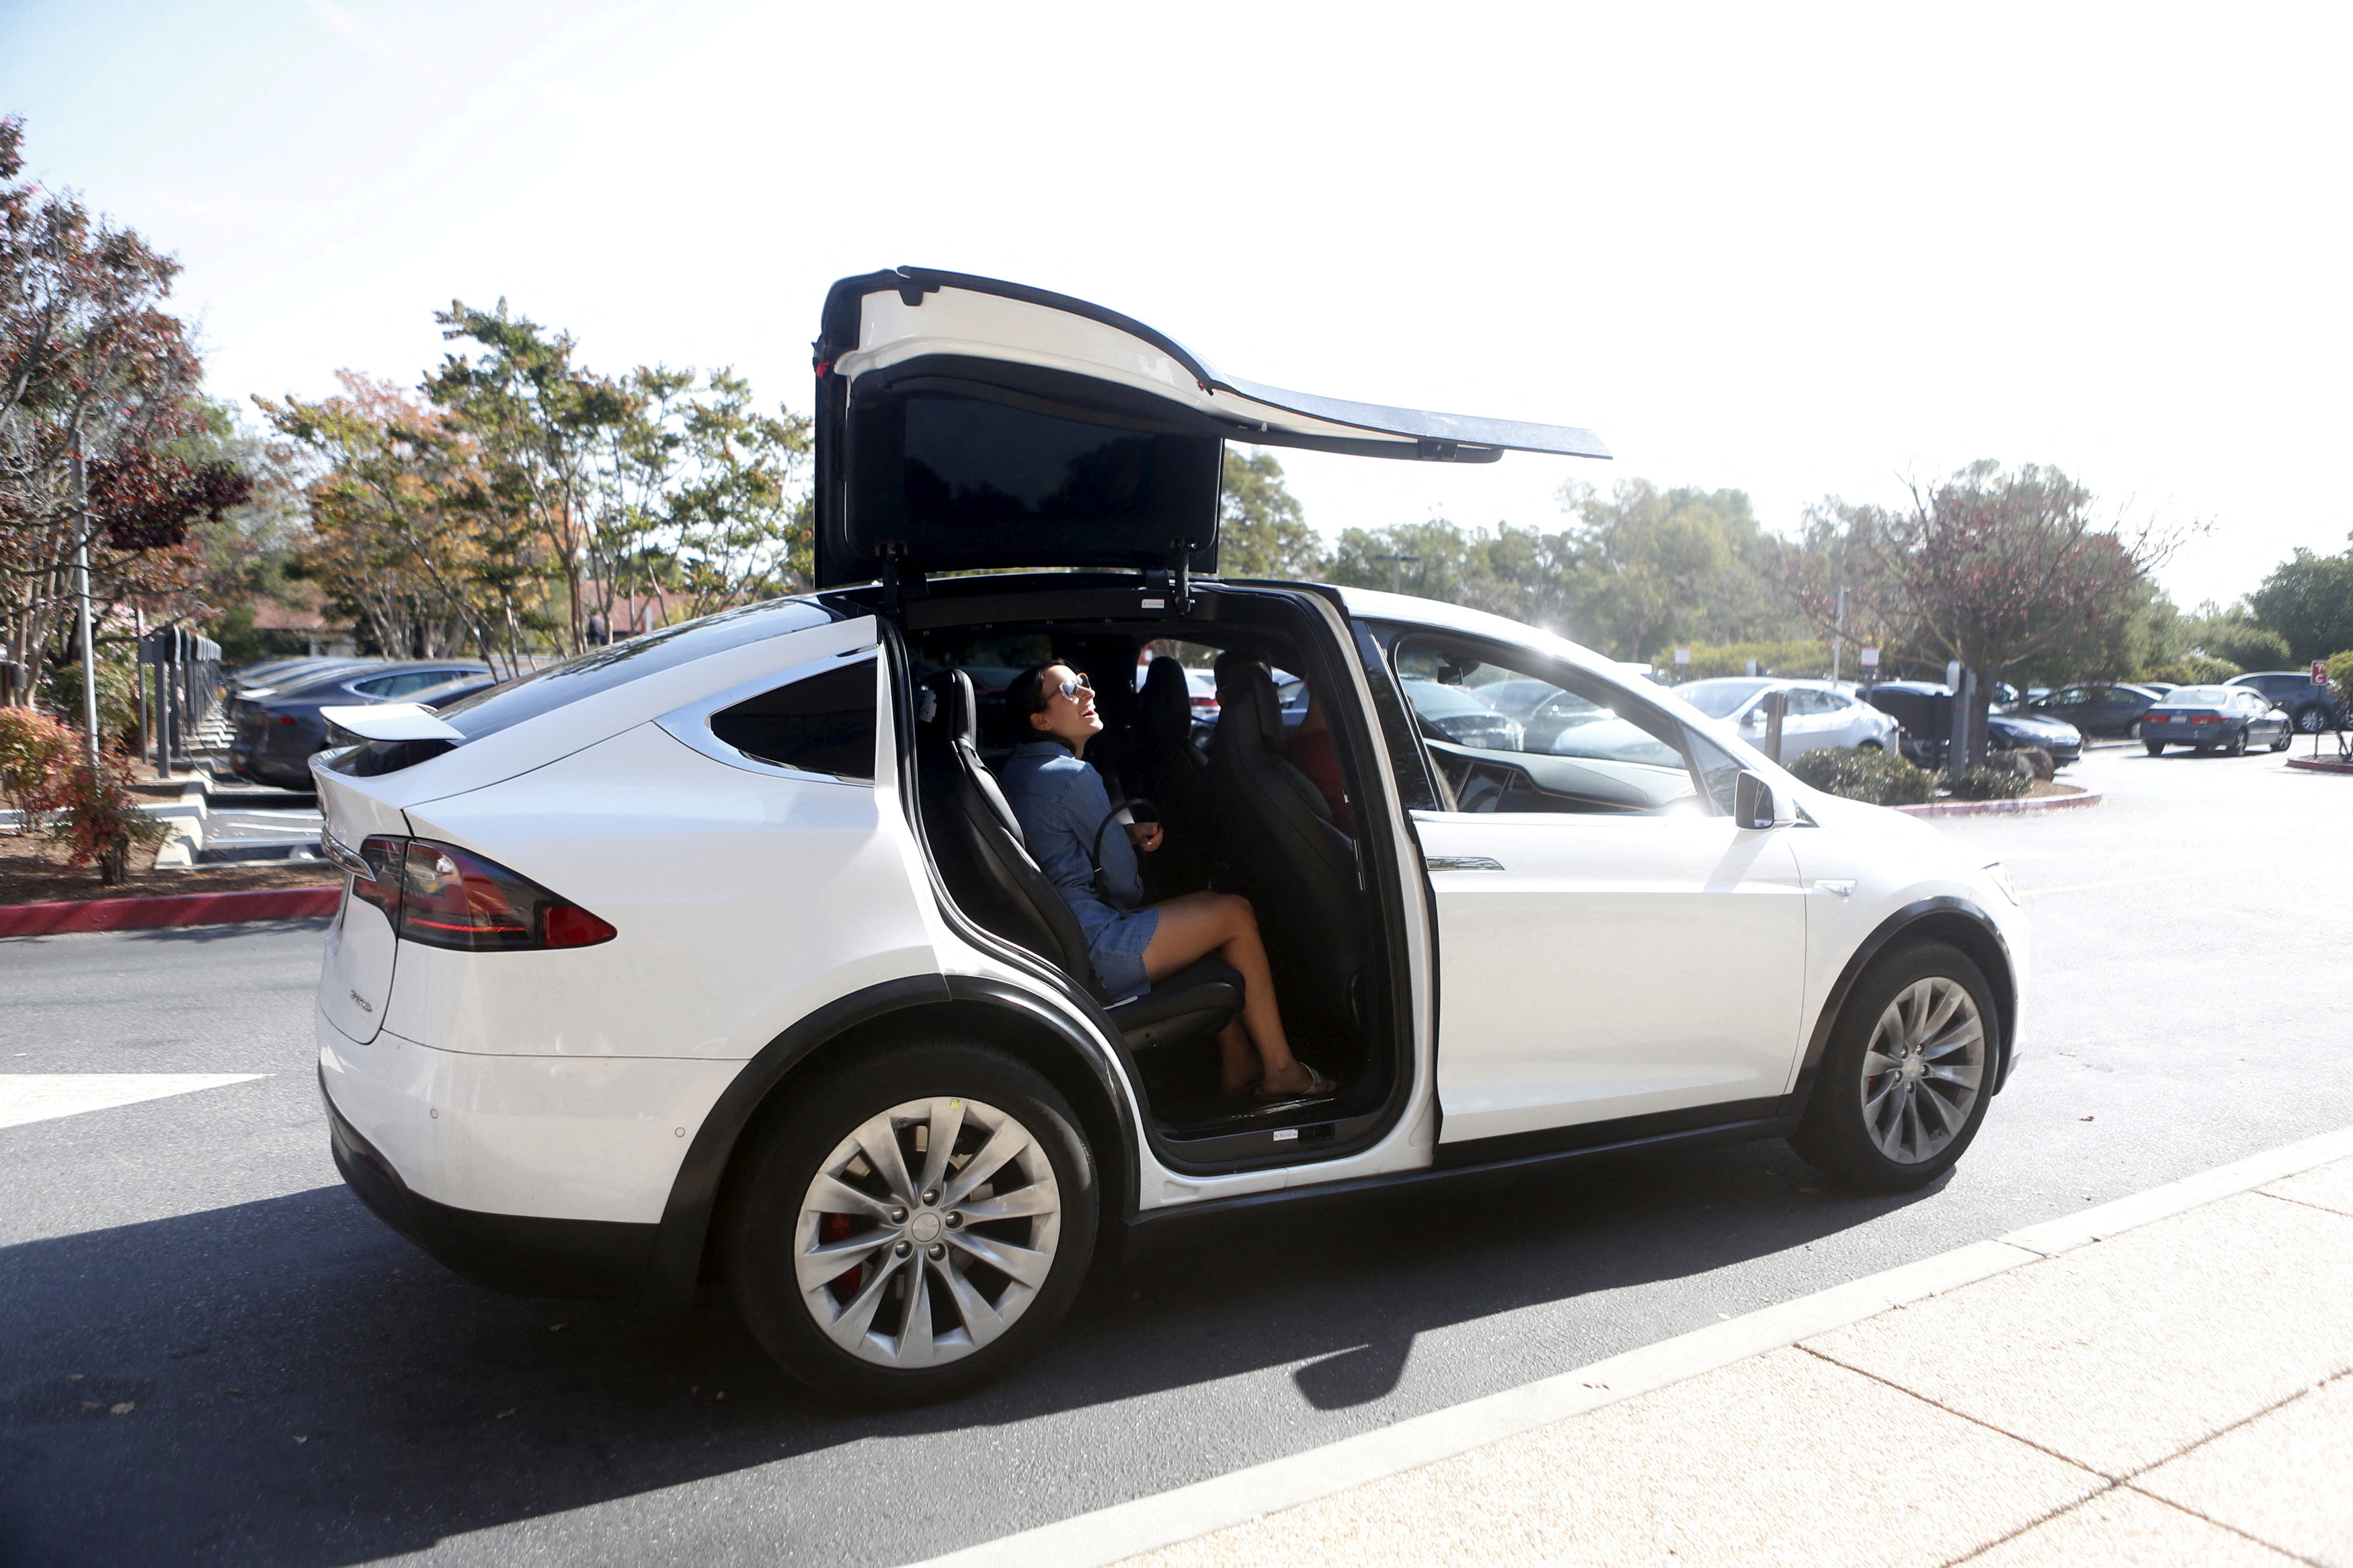 A Tesla Model X picks up passengers during a Tesla event in Palo Alto, California